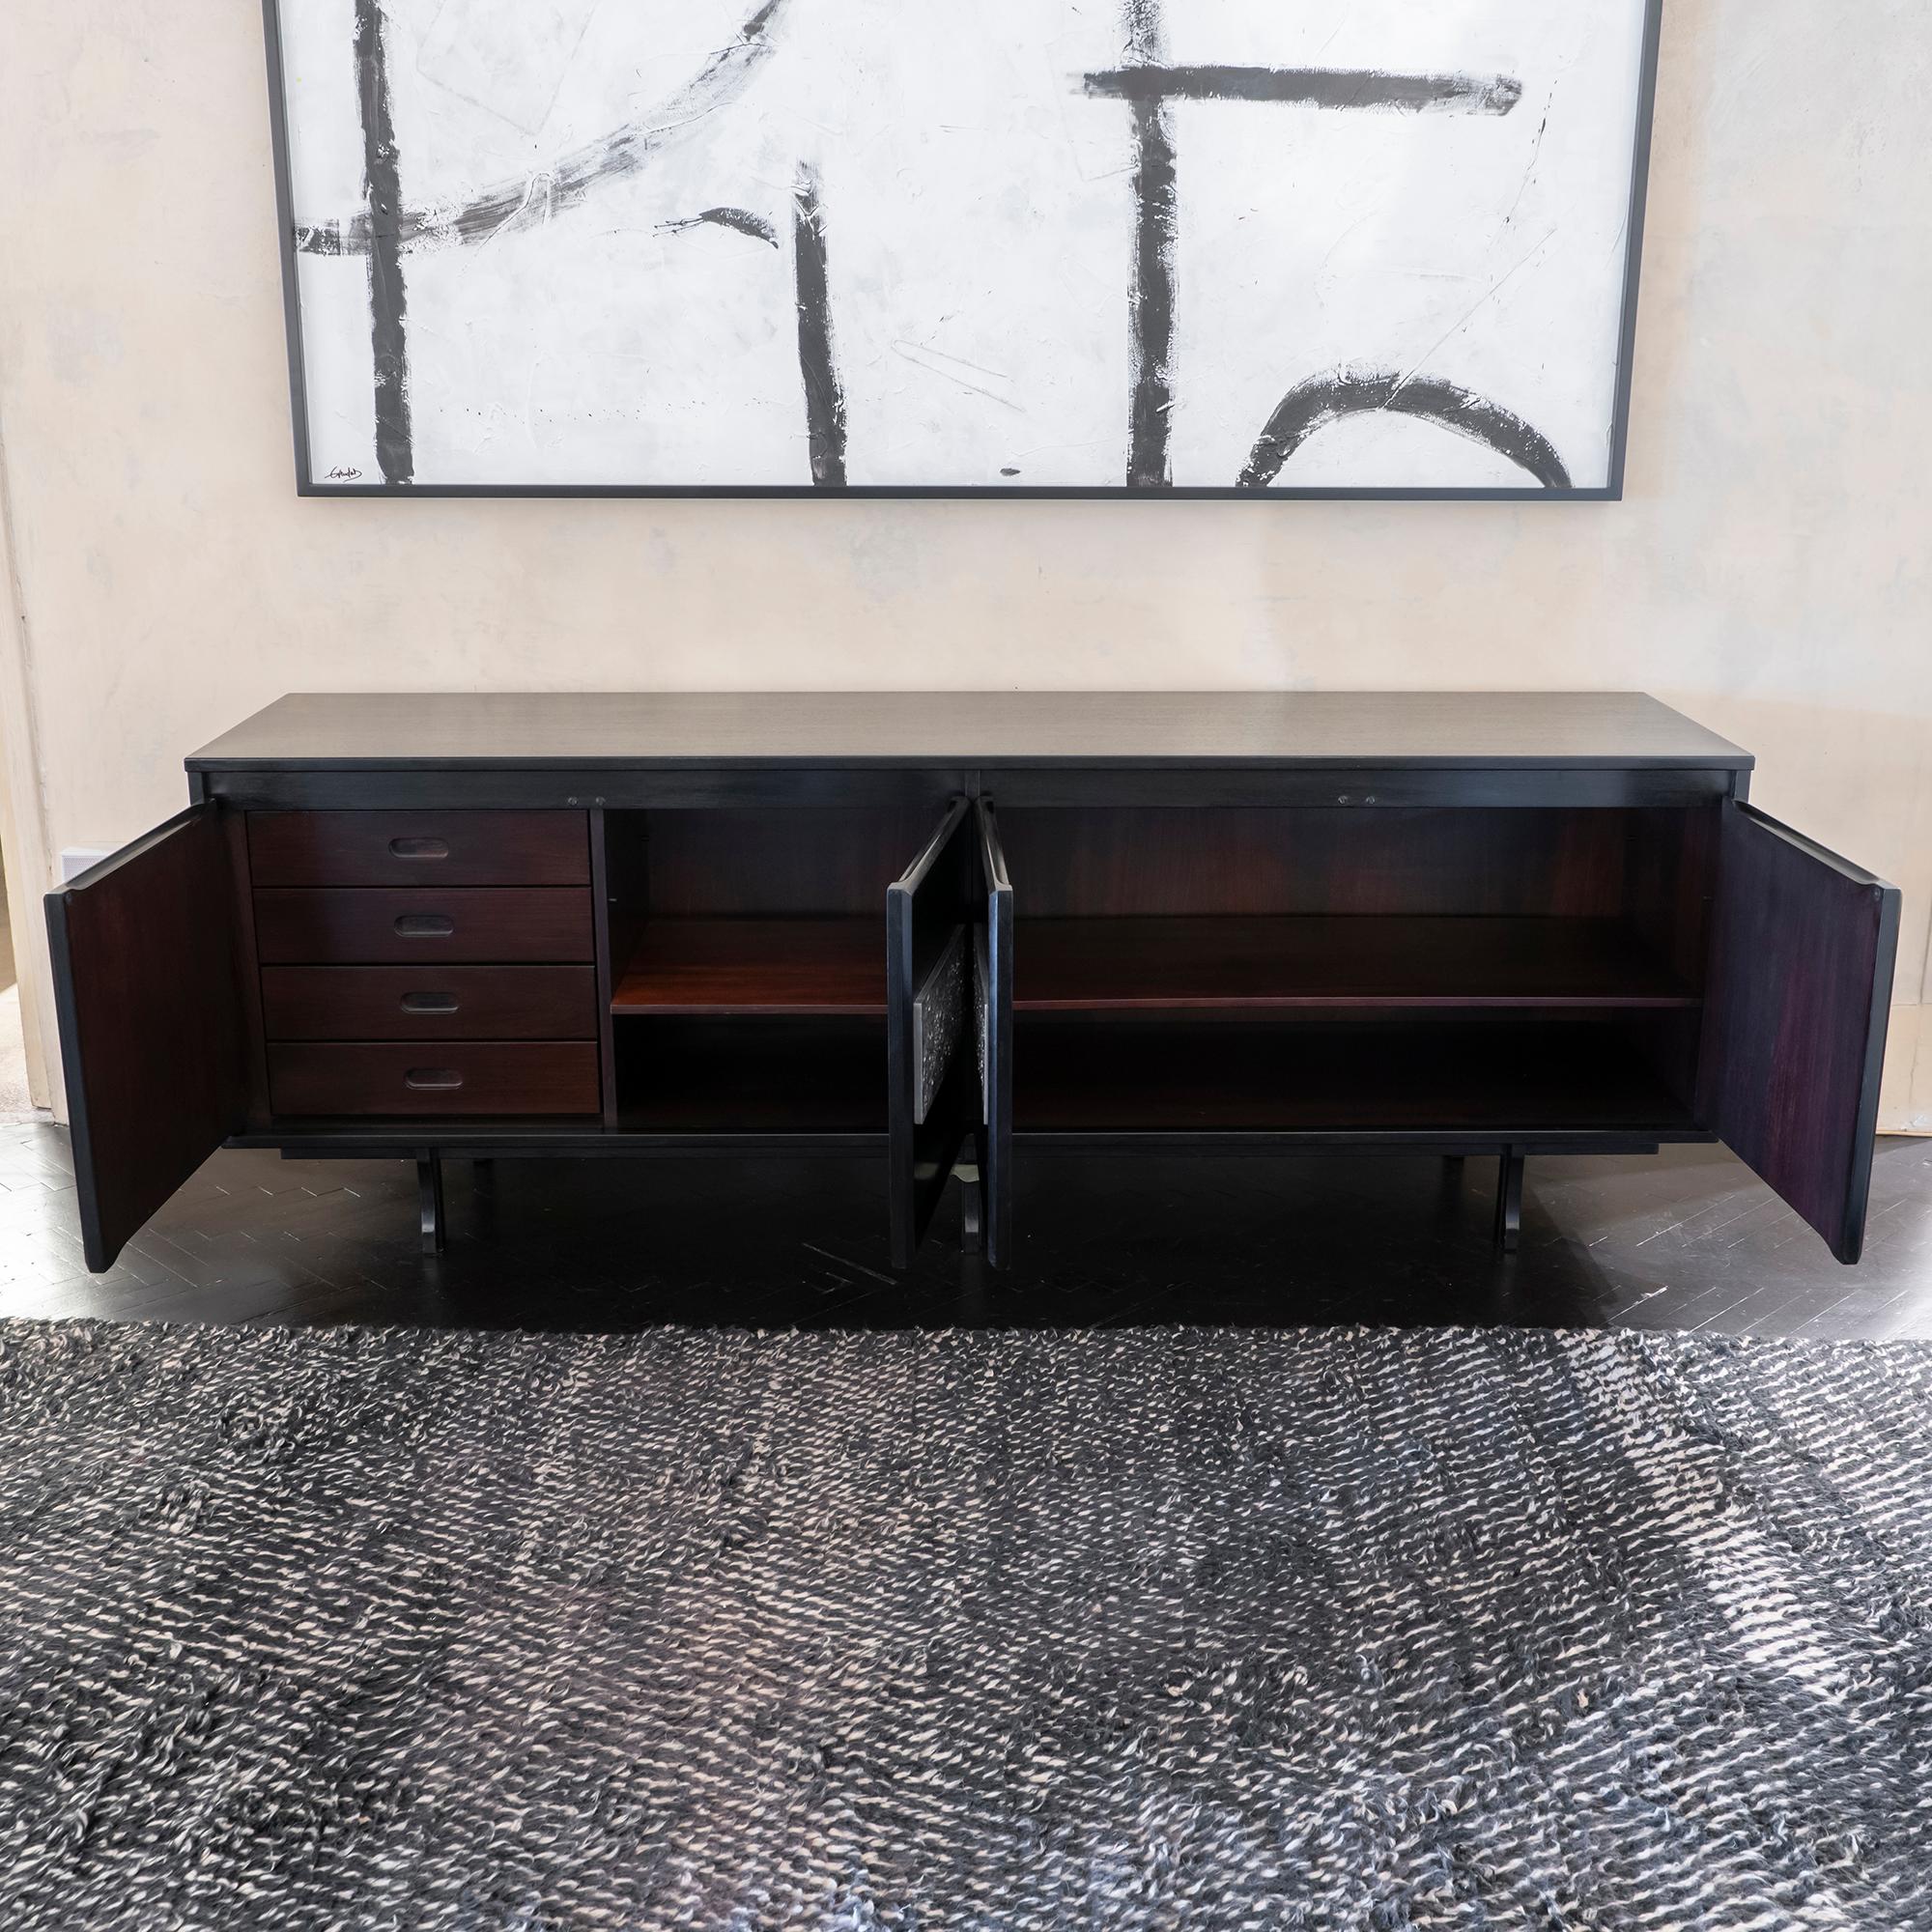 Ebonized palisander sideboard with four drawers and adjustable shelves, hammered metal decorative elements, Giovanni Ausenda, Italy, 1960s.